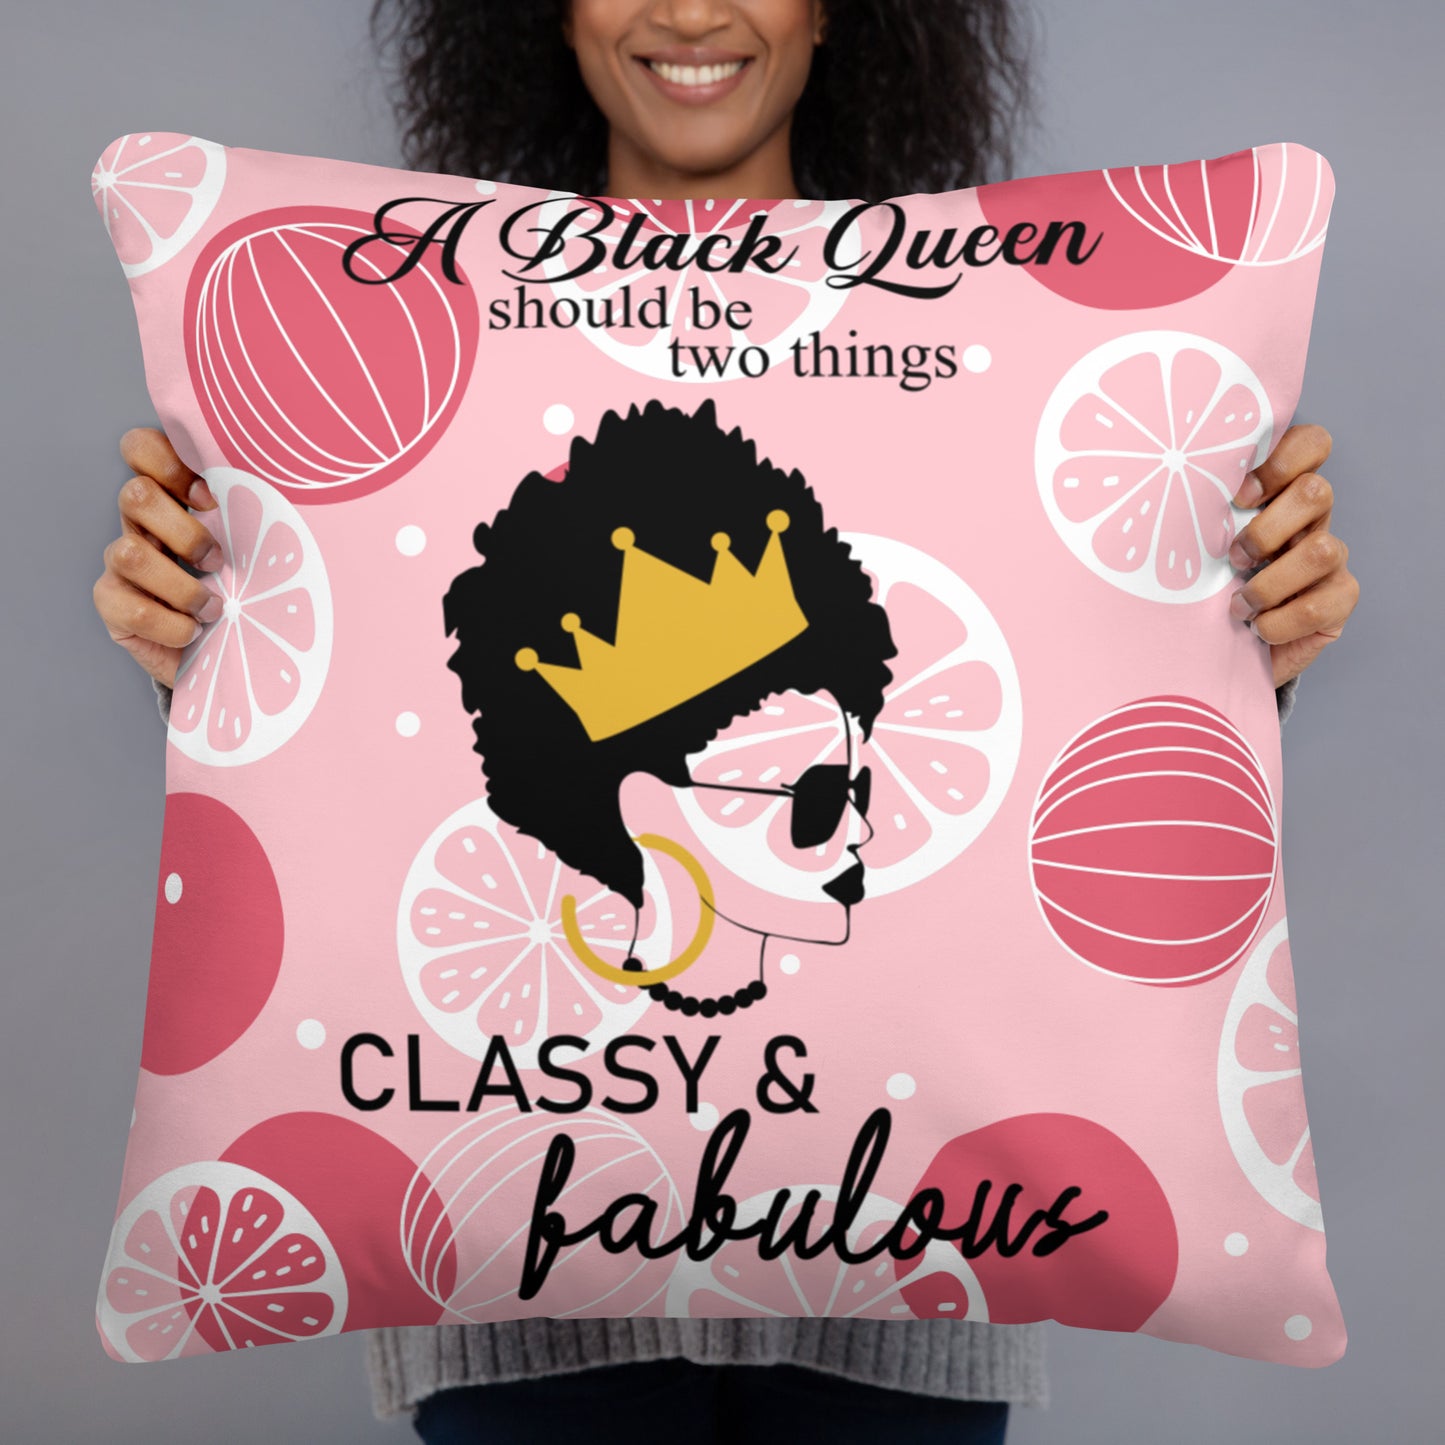 FABULOUS AND CLASSY BLACK QUEEN- Basic Pillow